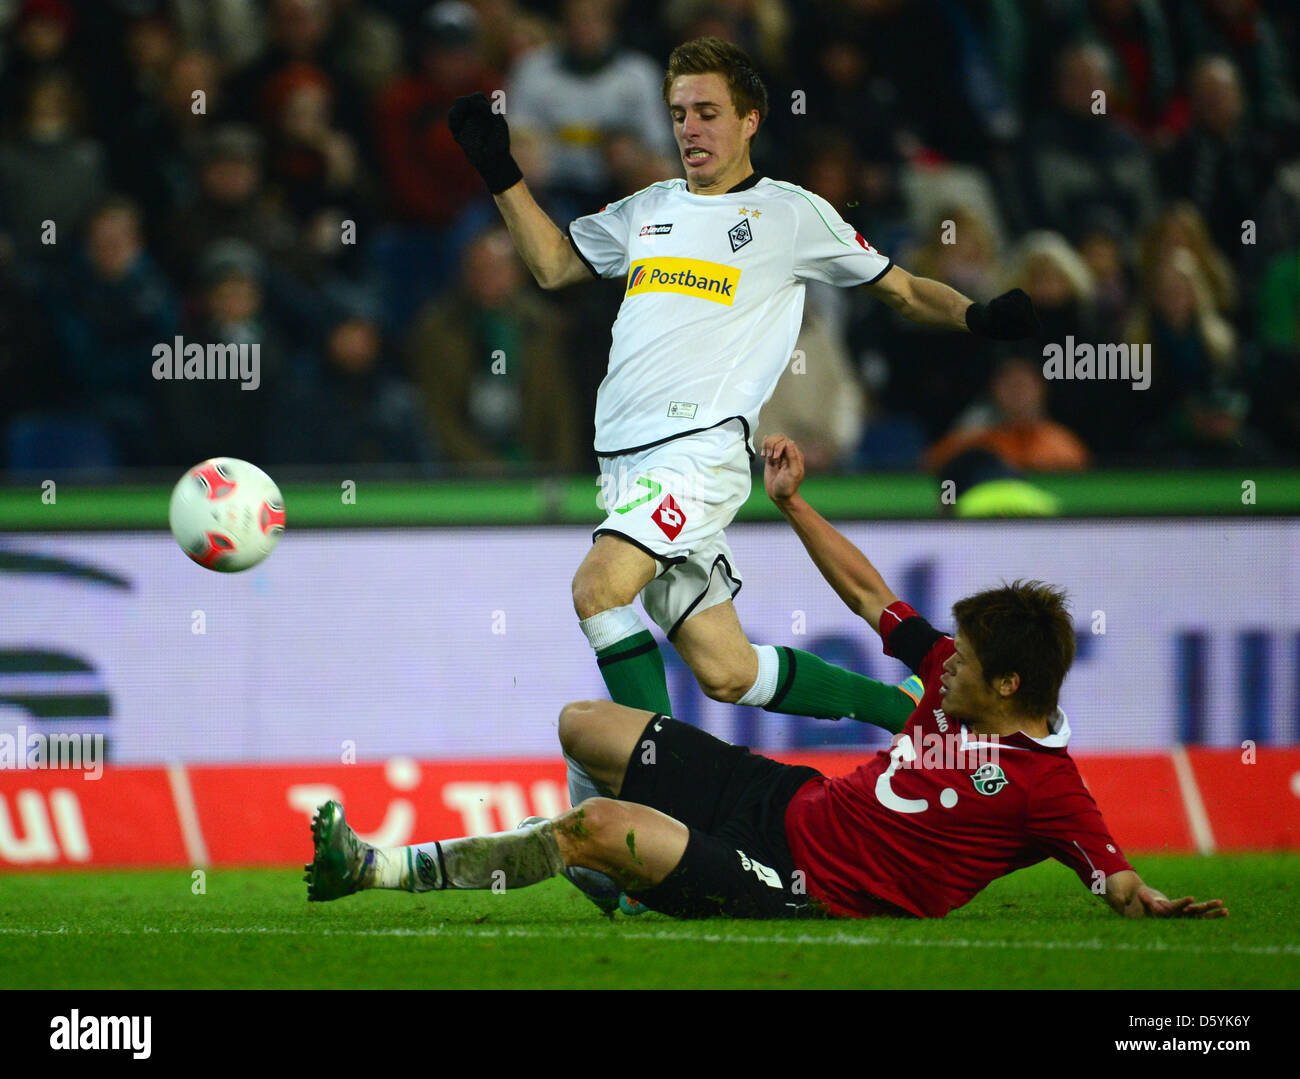 Hanover's Hiroki Sakai (bottom) vies for the ball with Moenchengladbach's Patrick Herrmann during the German Bundesliga soccer match between Hanover 96 and Borussia Moenchengladbach at AWD-Arena in Hanover, Germany, 28 October 2012. Photo: PETER STEFFEN (ATTENTION: EMBARGO CONDITIONS! The DFL permits the further utilisation of up to 15 pictures only (no sequntial pictures or video- Stock Photo